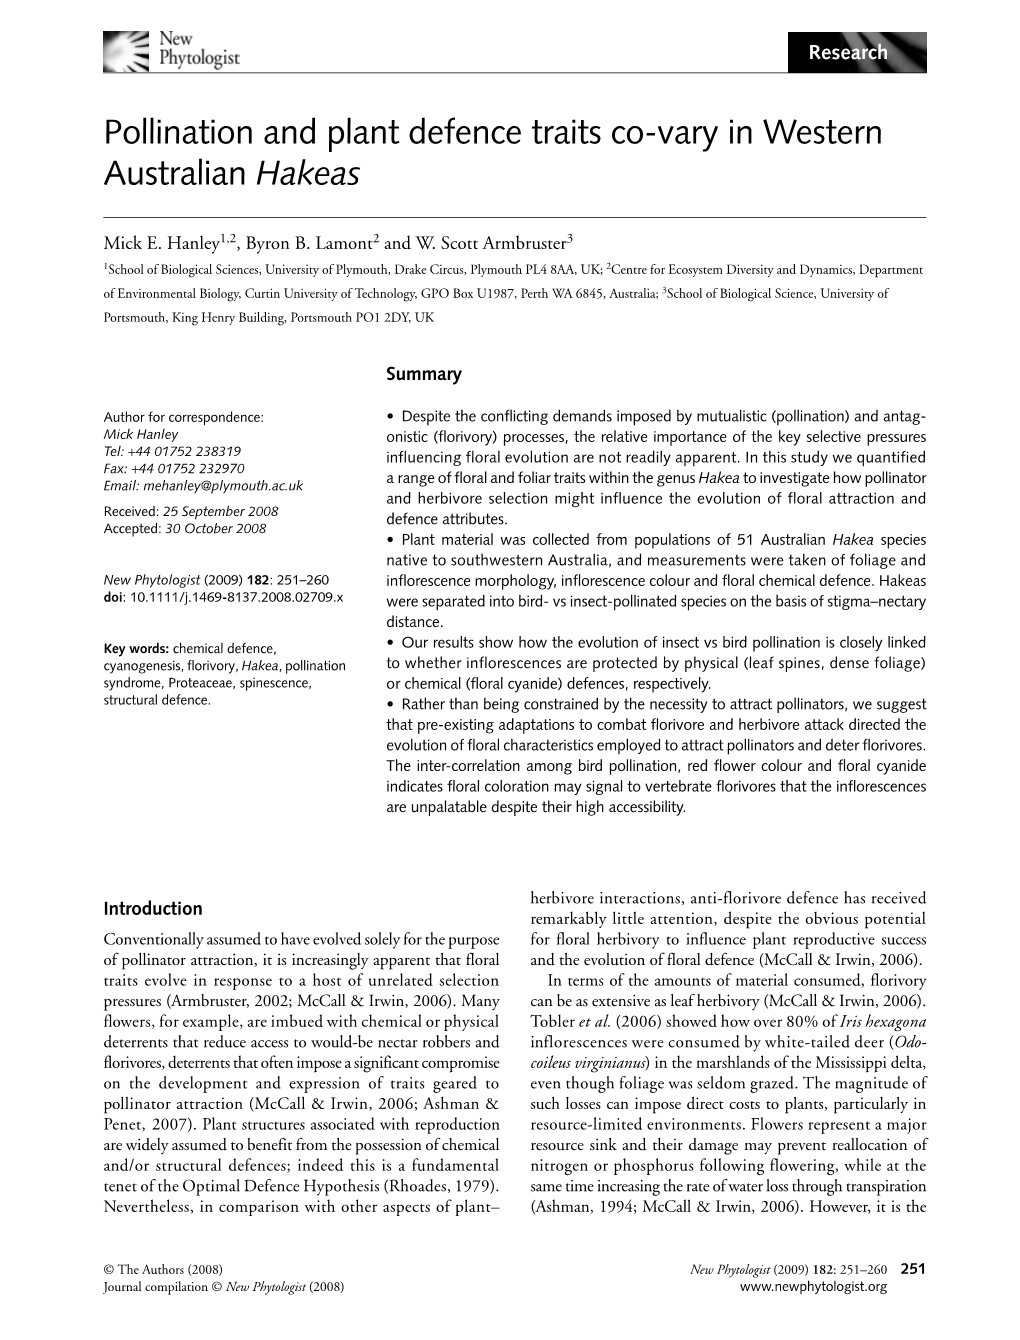 Pollination and Plant Defence Traits Covary in Western Australian Hakeas